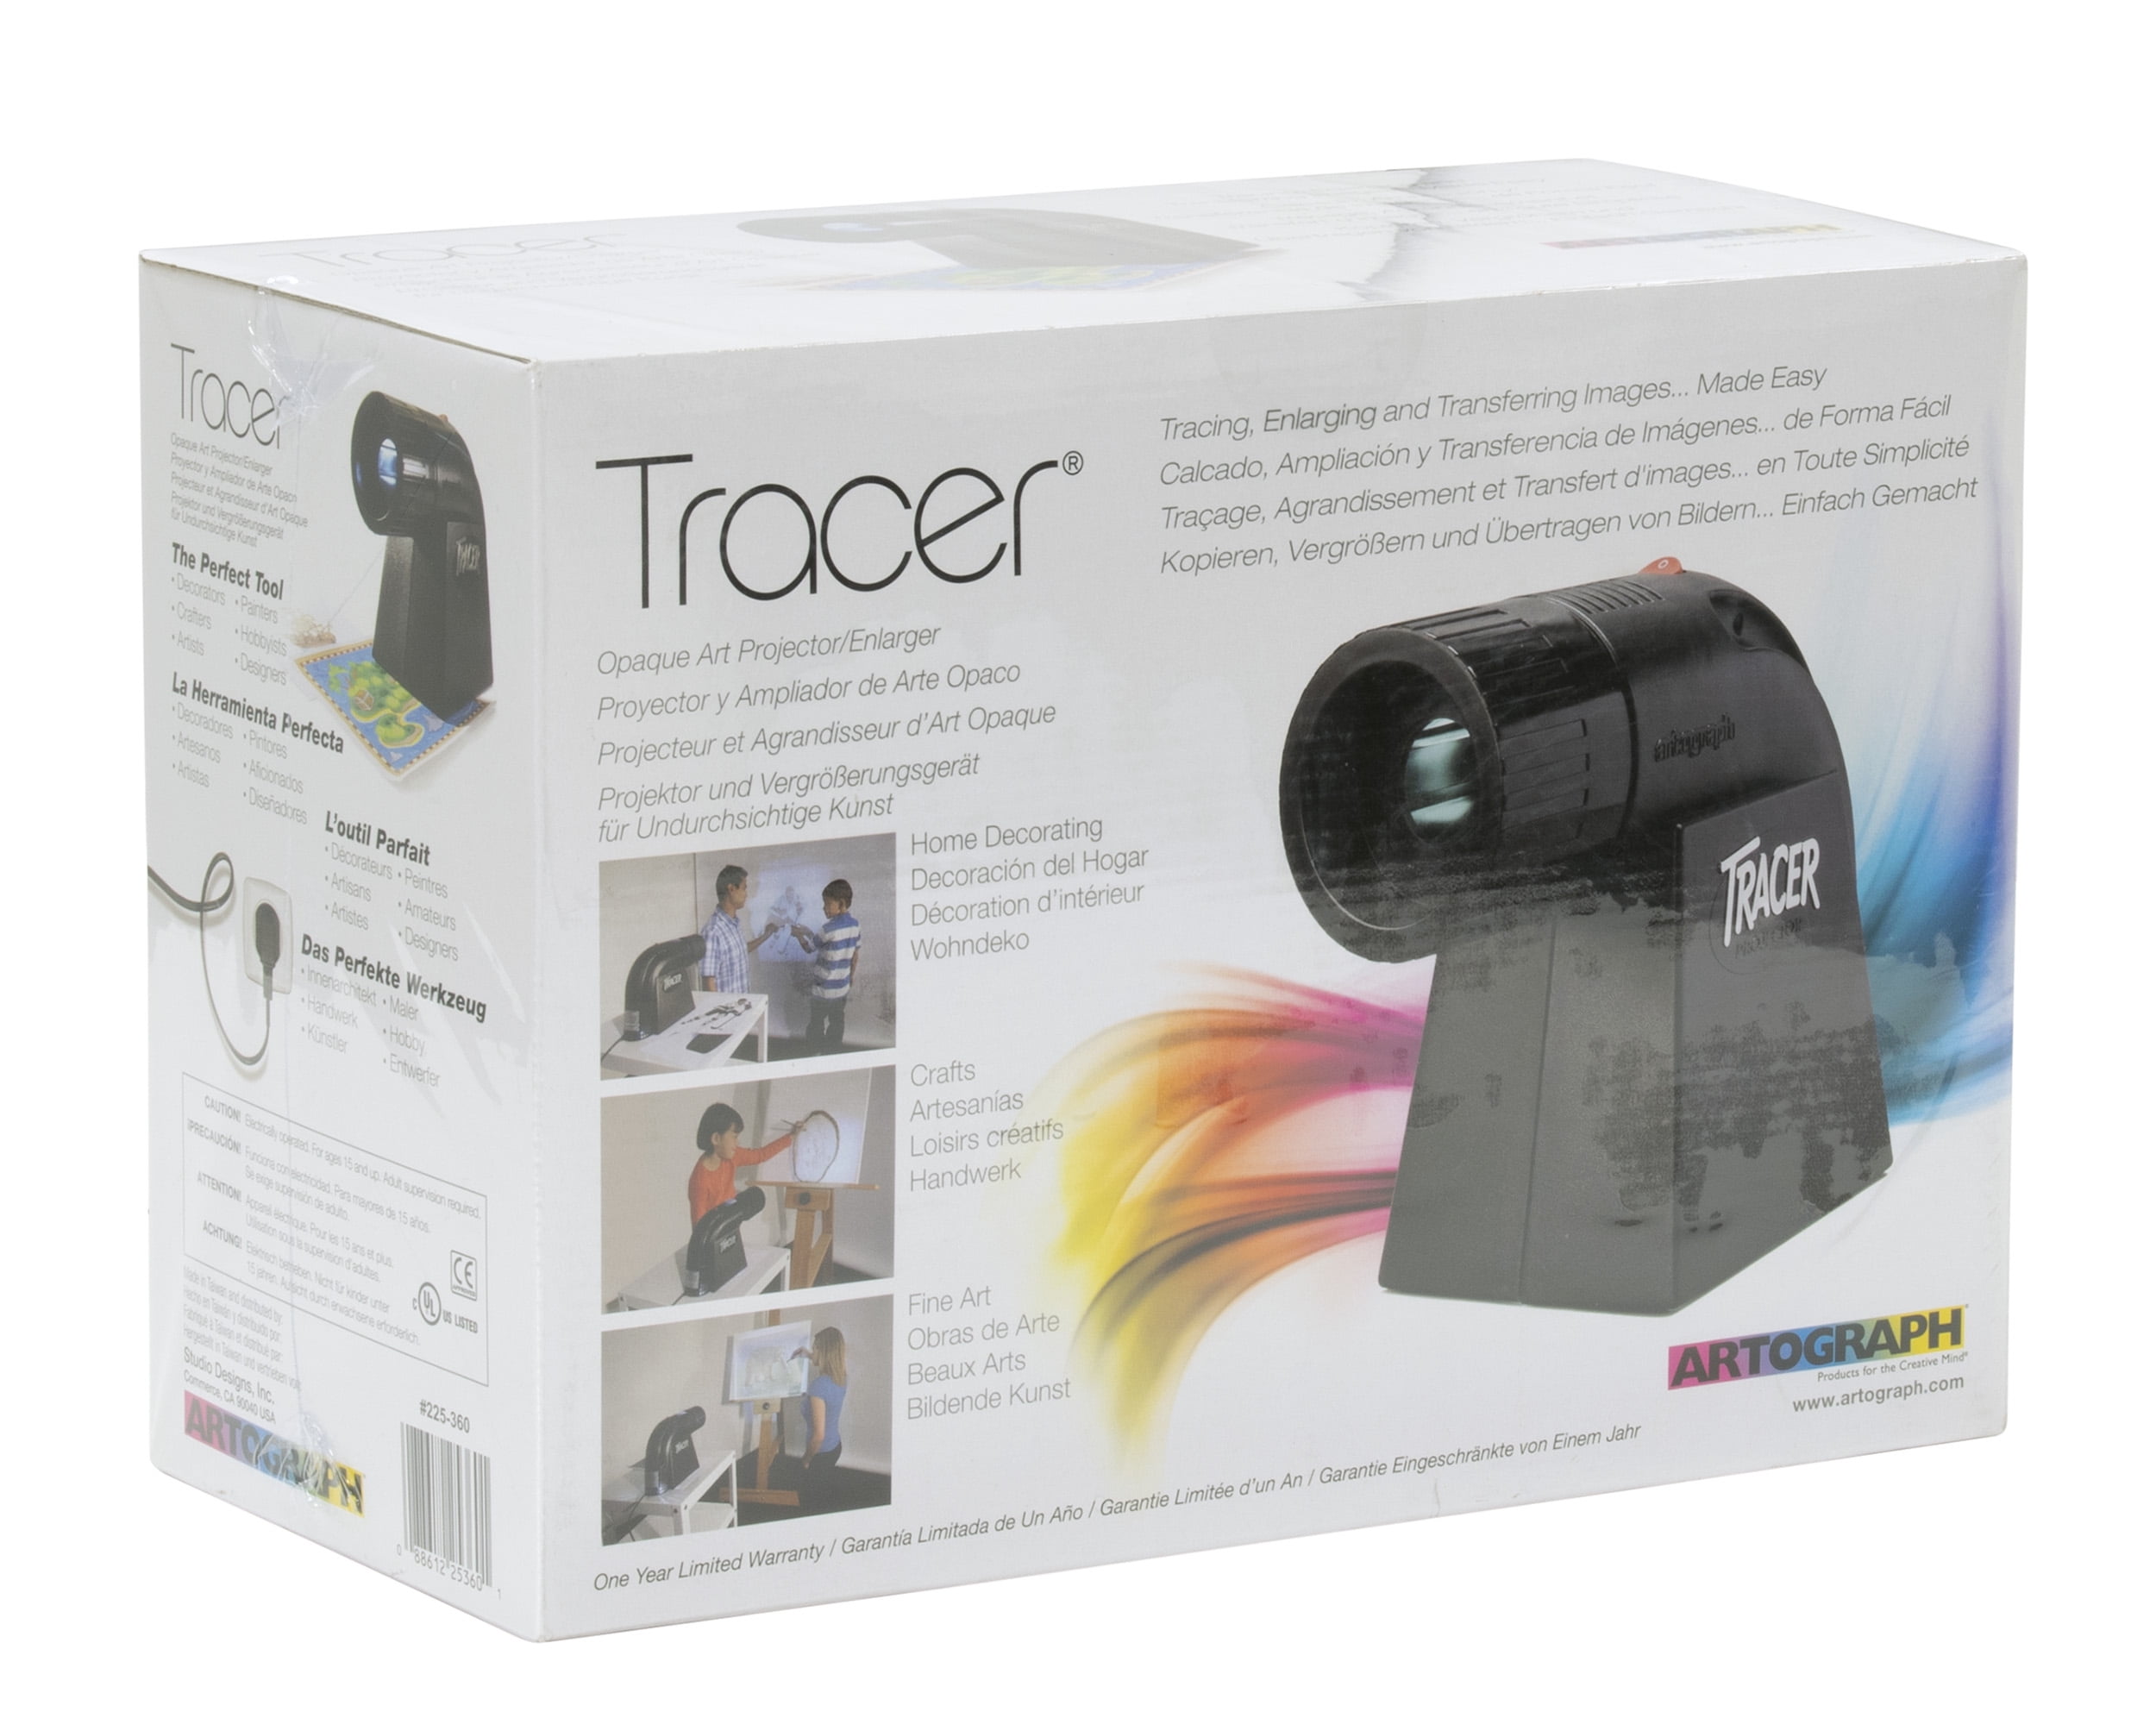 ARTOGRAPH LED Tracer Opaque Non-Digital Art Projector for Image  Reproduction 25370 - The Home Depot